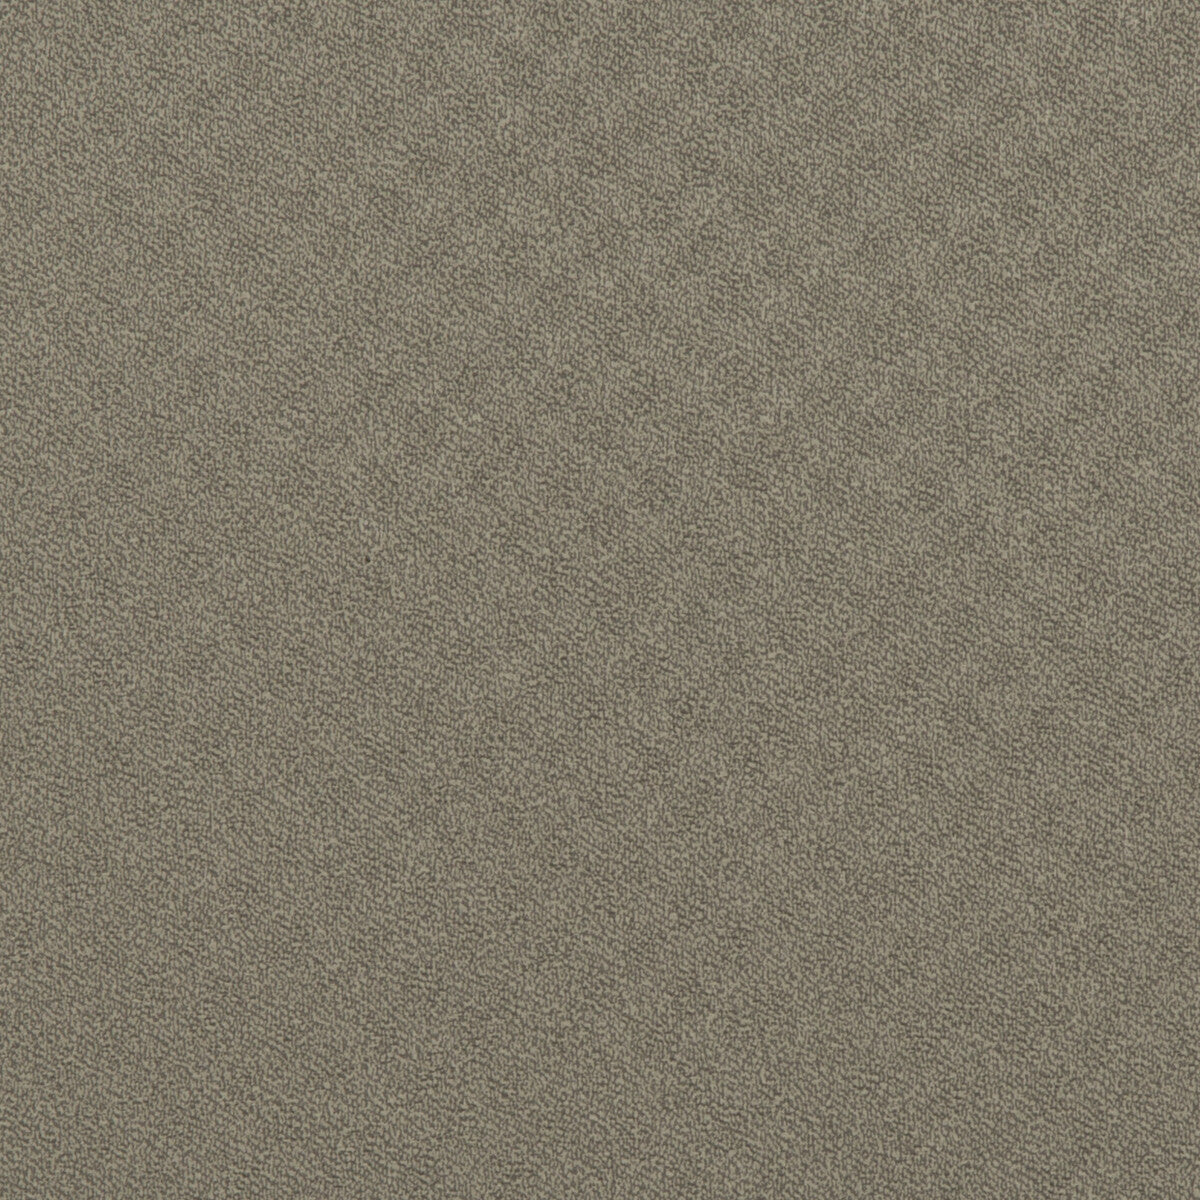 Invincible fabric in meteor color - pattern INVINCIBLE.21.0 - by Kravet Contract in the Faux Leather Extreme Performance collection